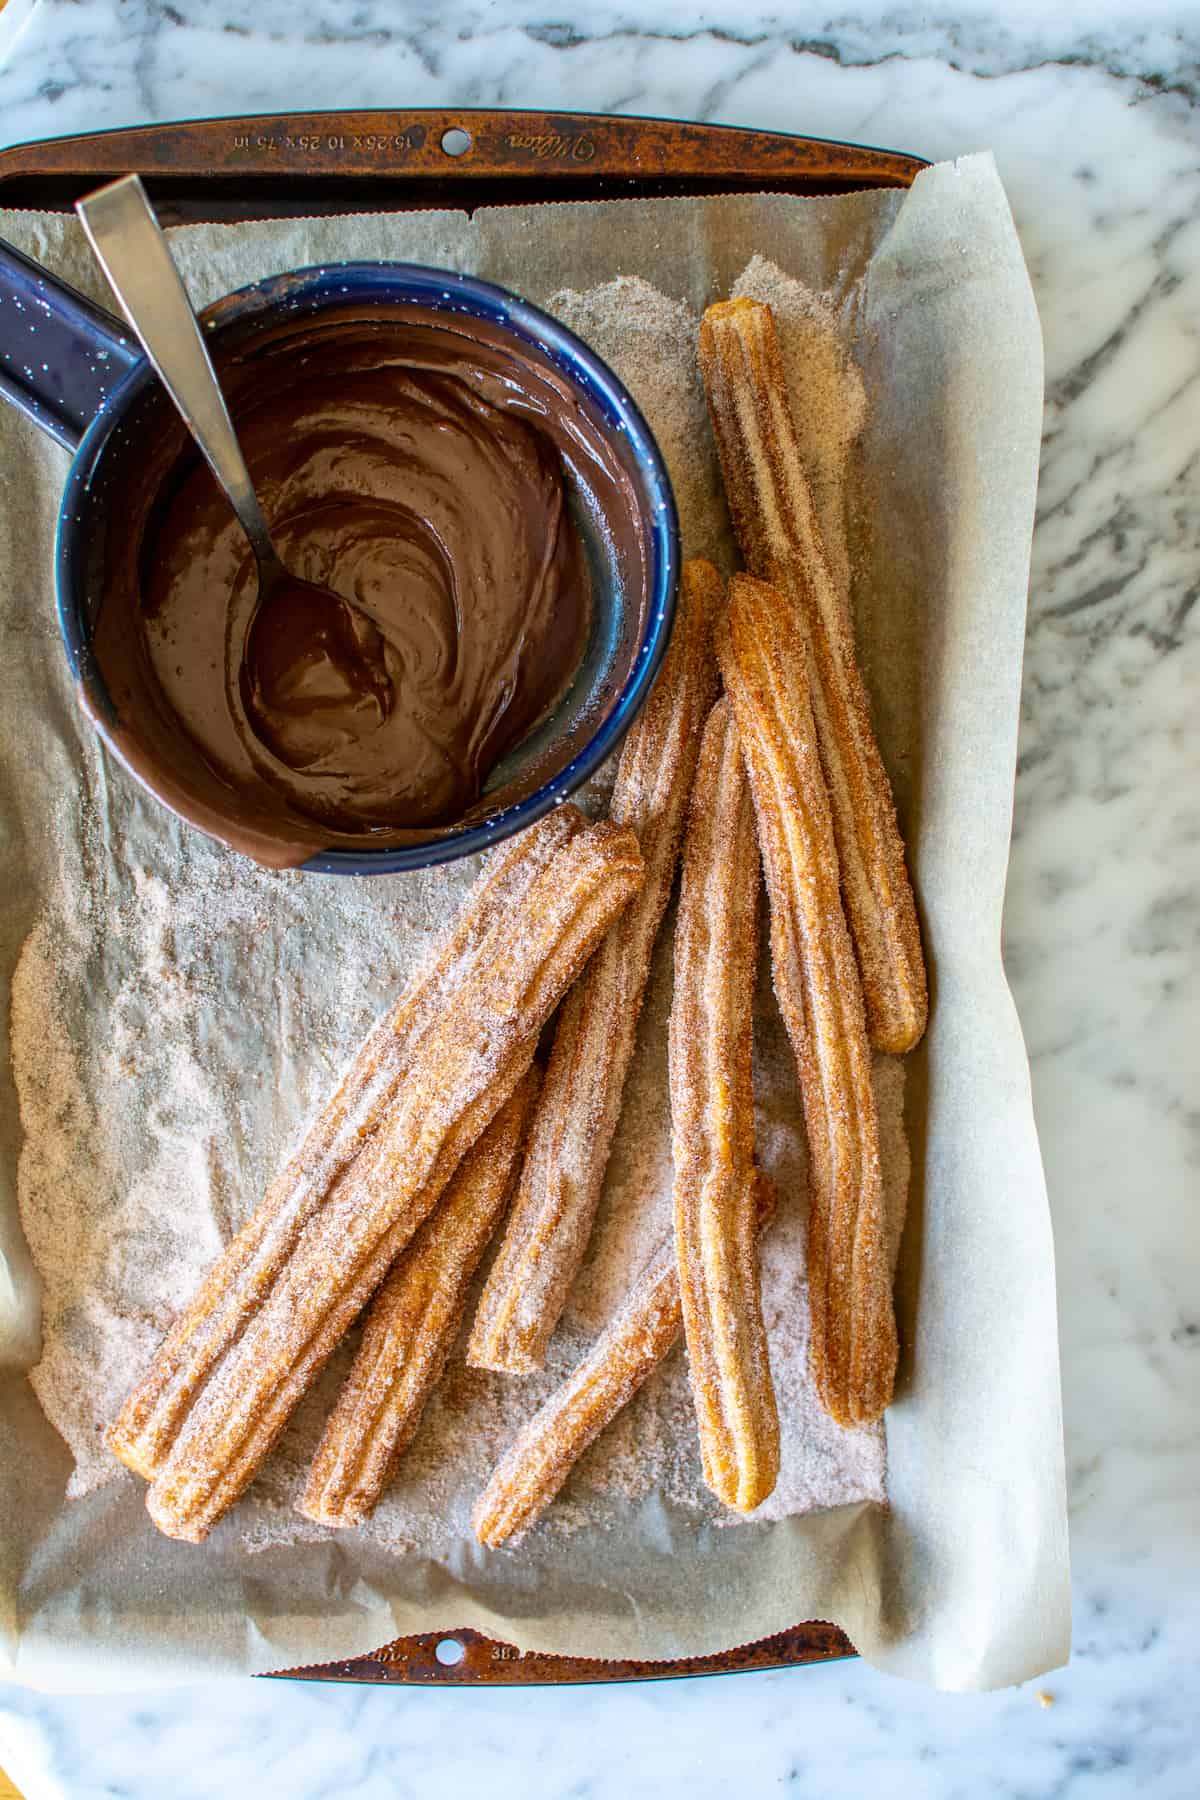 Several churros on a parchment-lined baking sheet with a blue saucepan of chocolate sauce next to them.